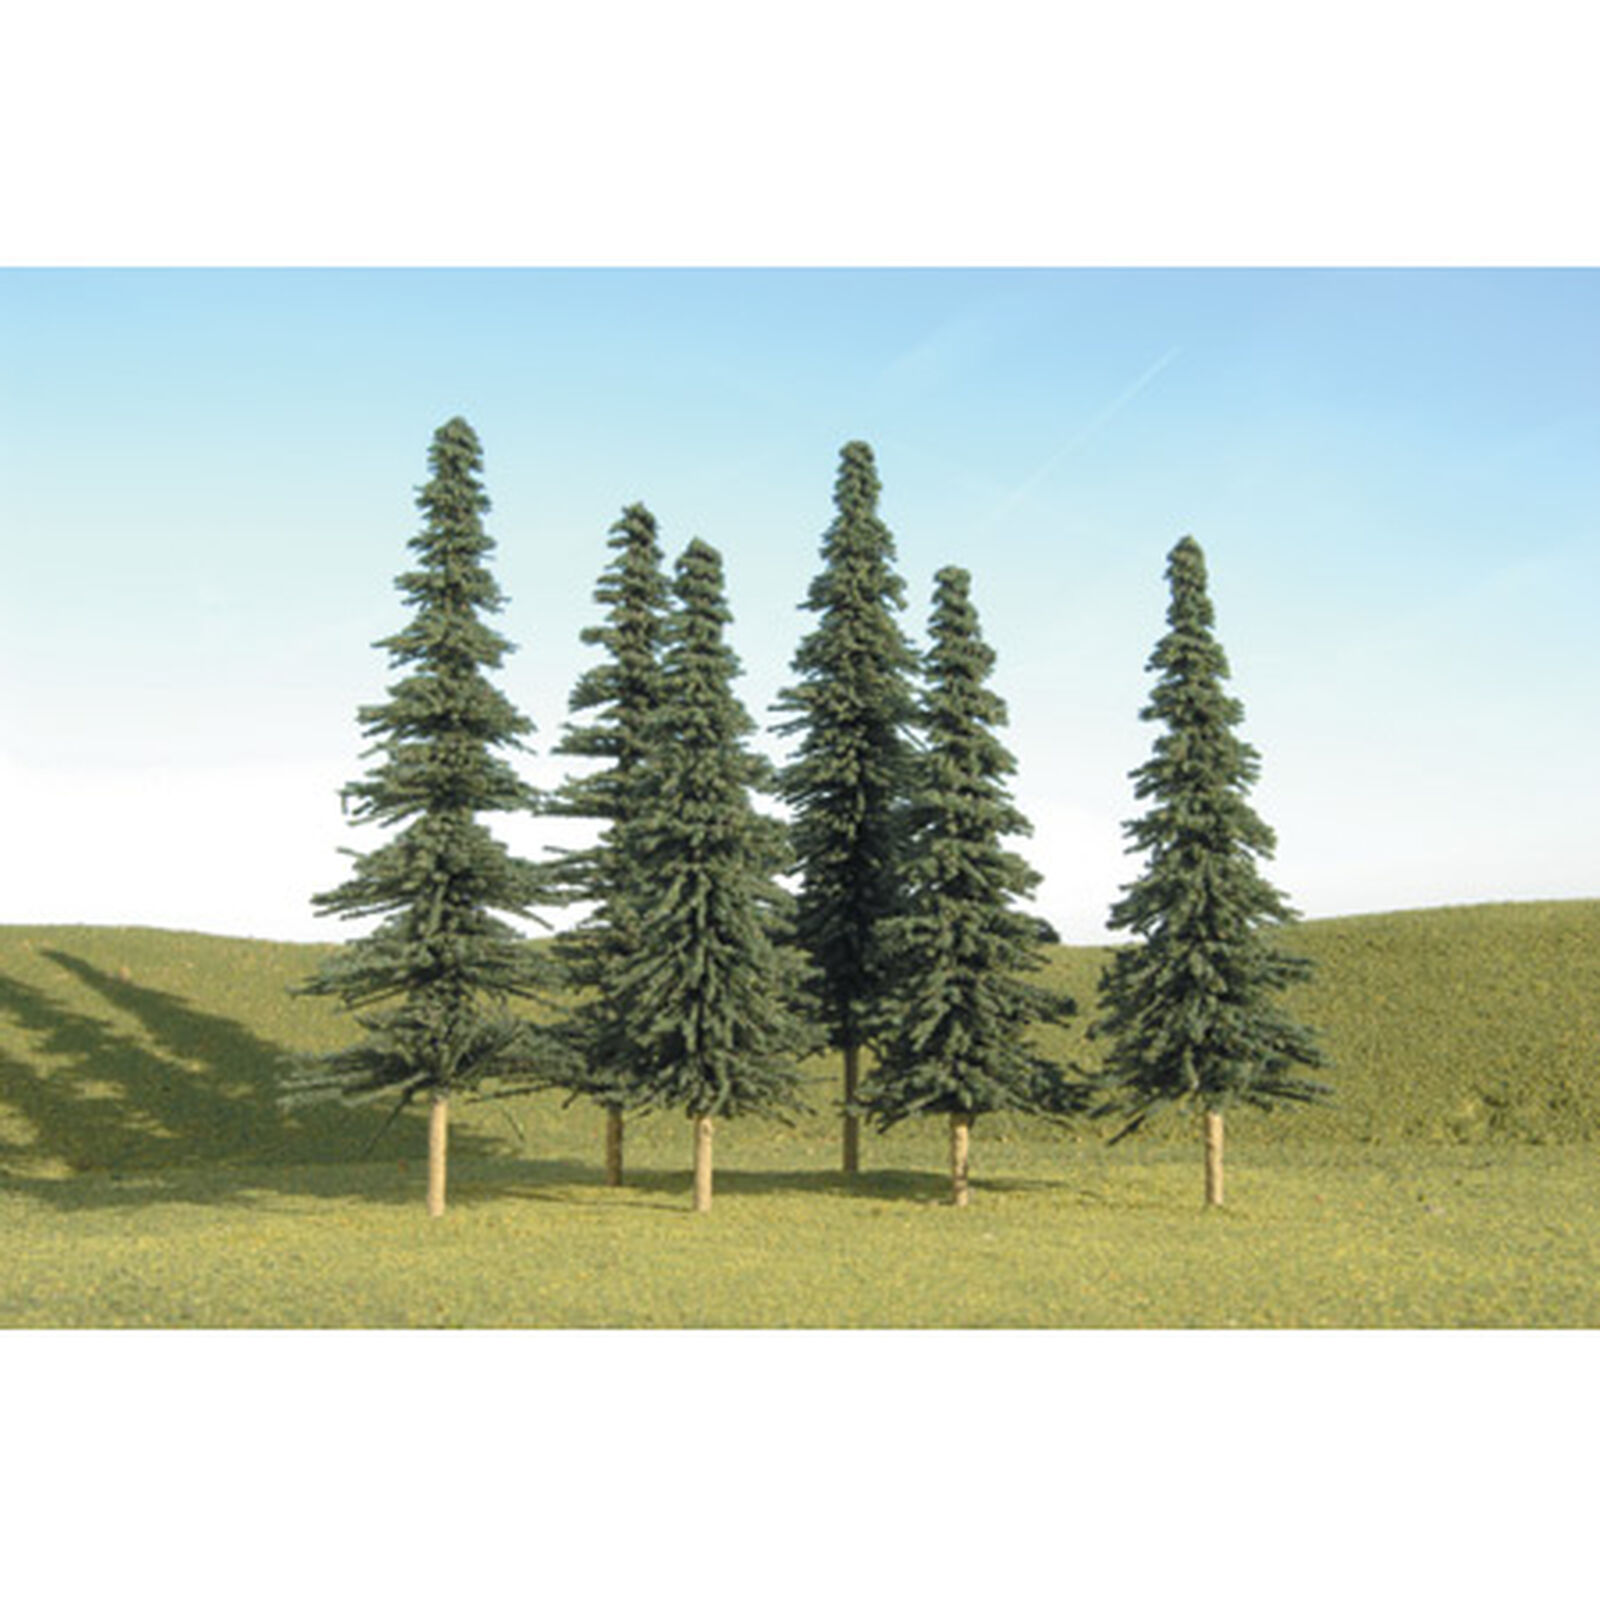 Scenescapes Spruce Trees, 5-6" (6)